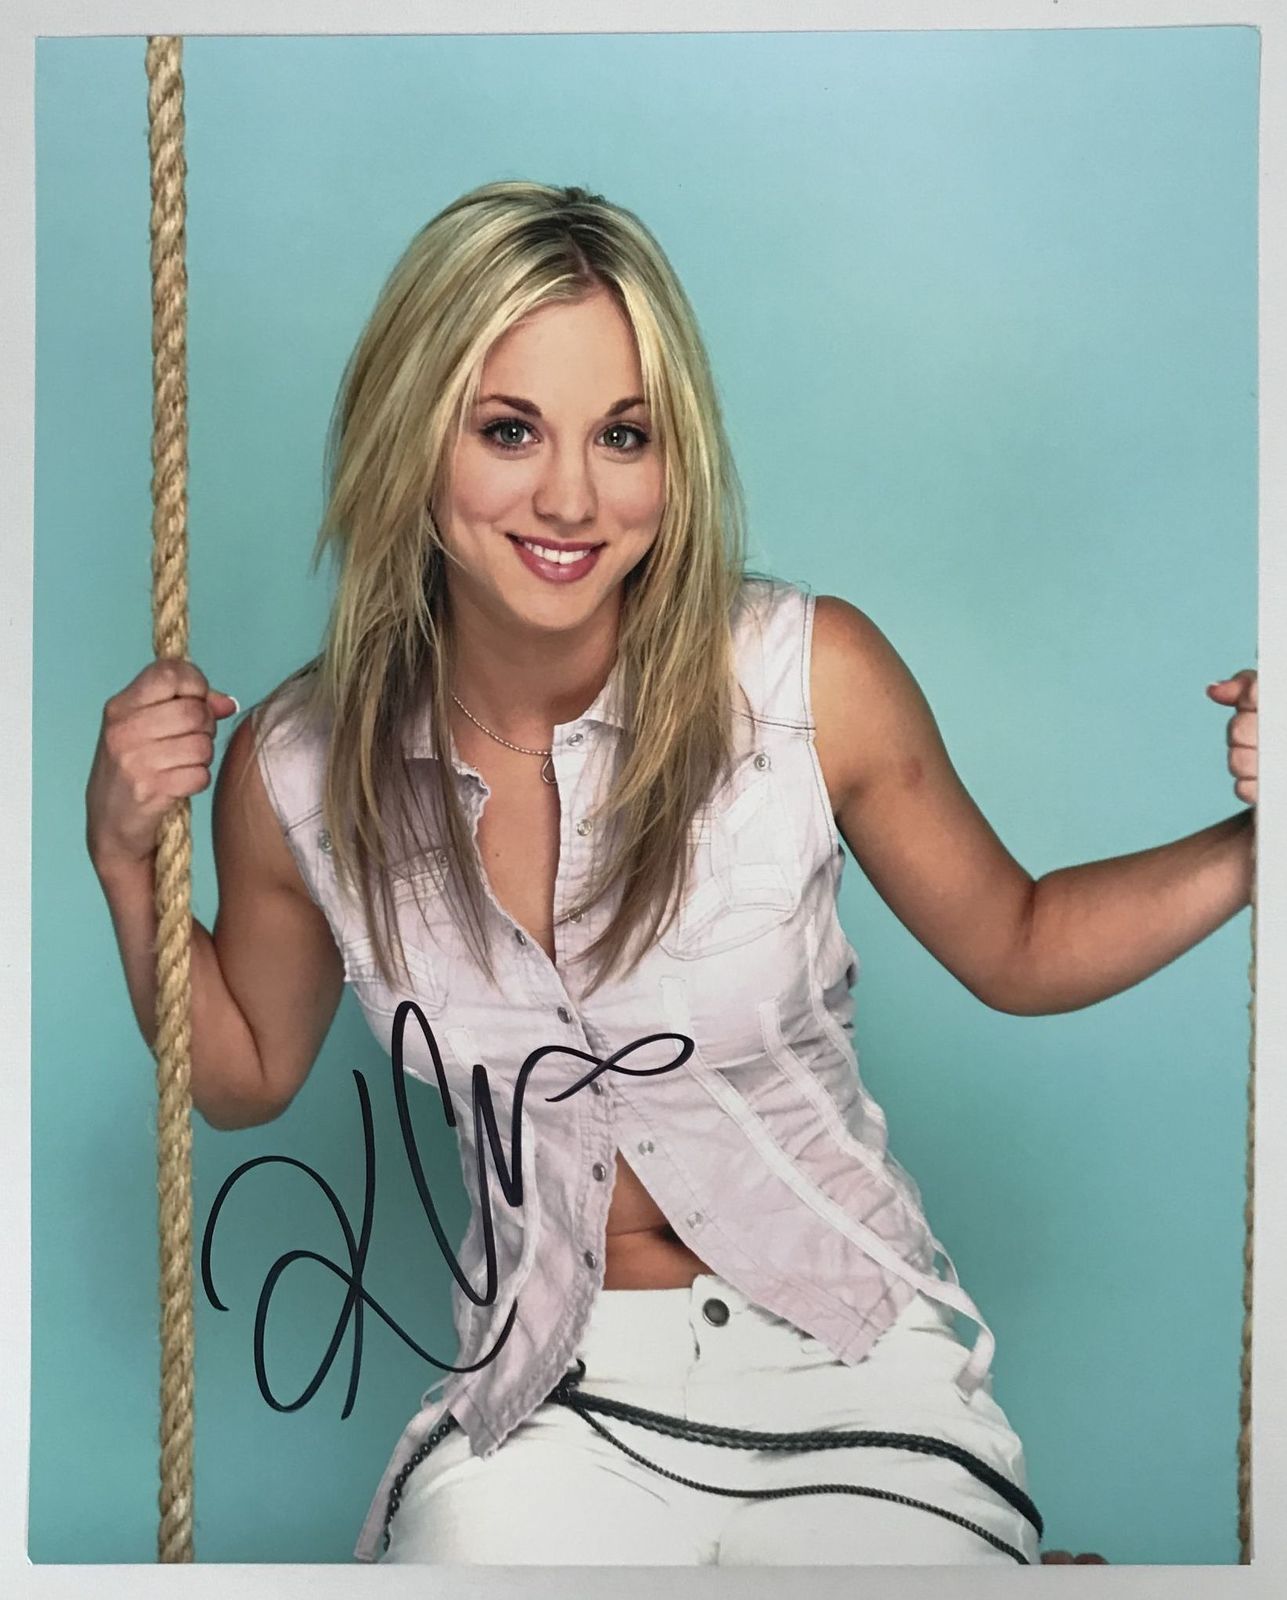 Primary image for Kaley Cuoco Signed Autographed Glossy 8x10 Photo #2